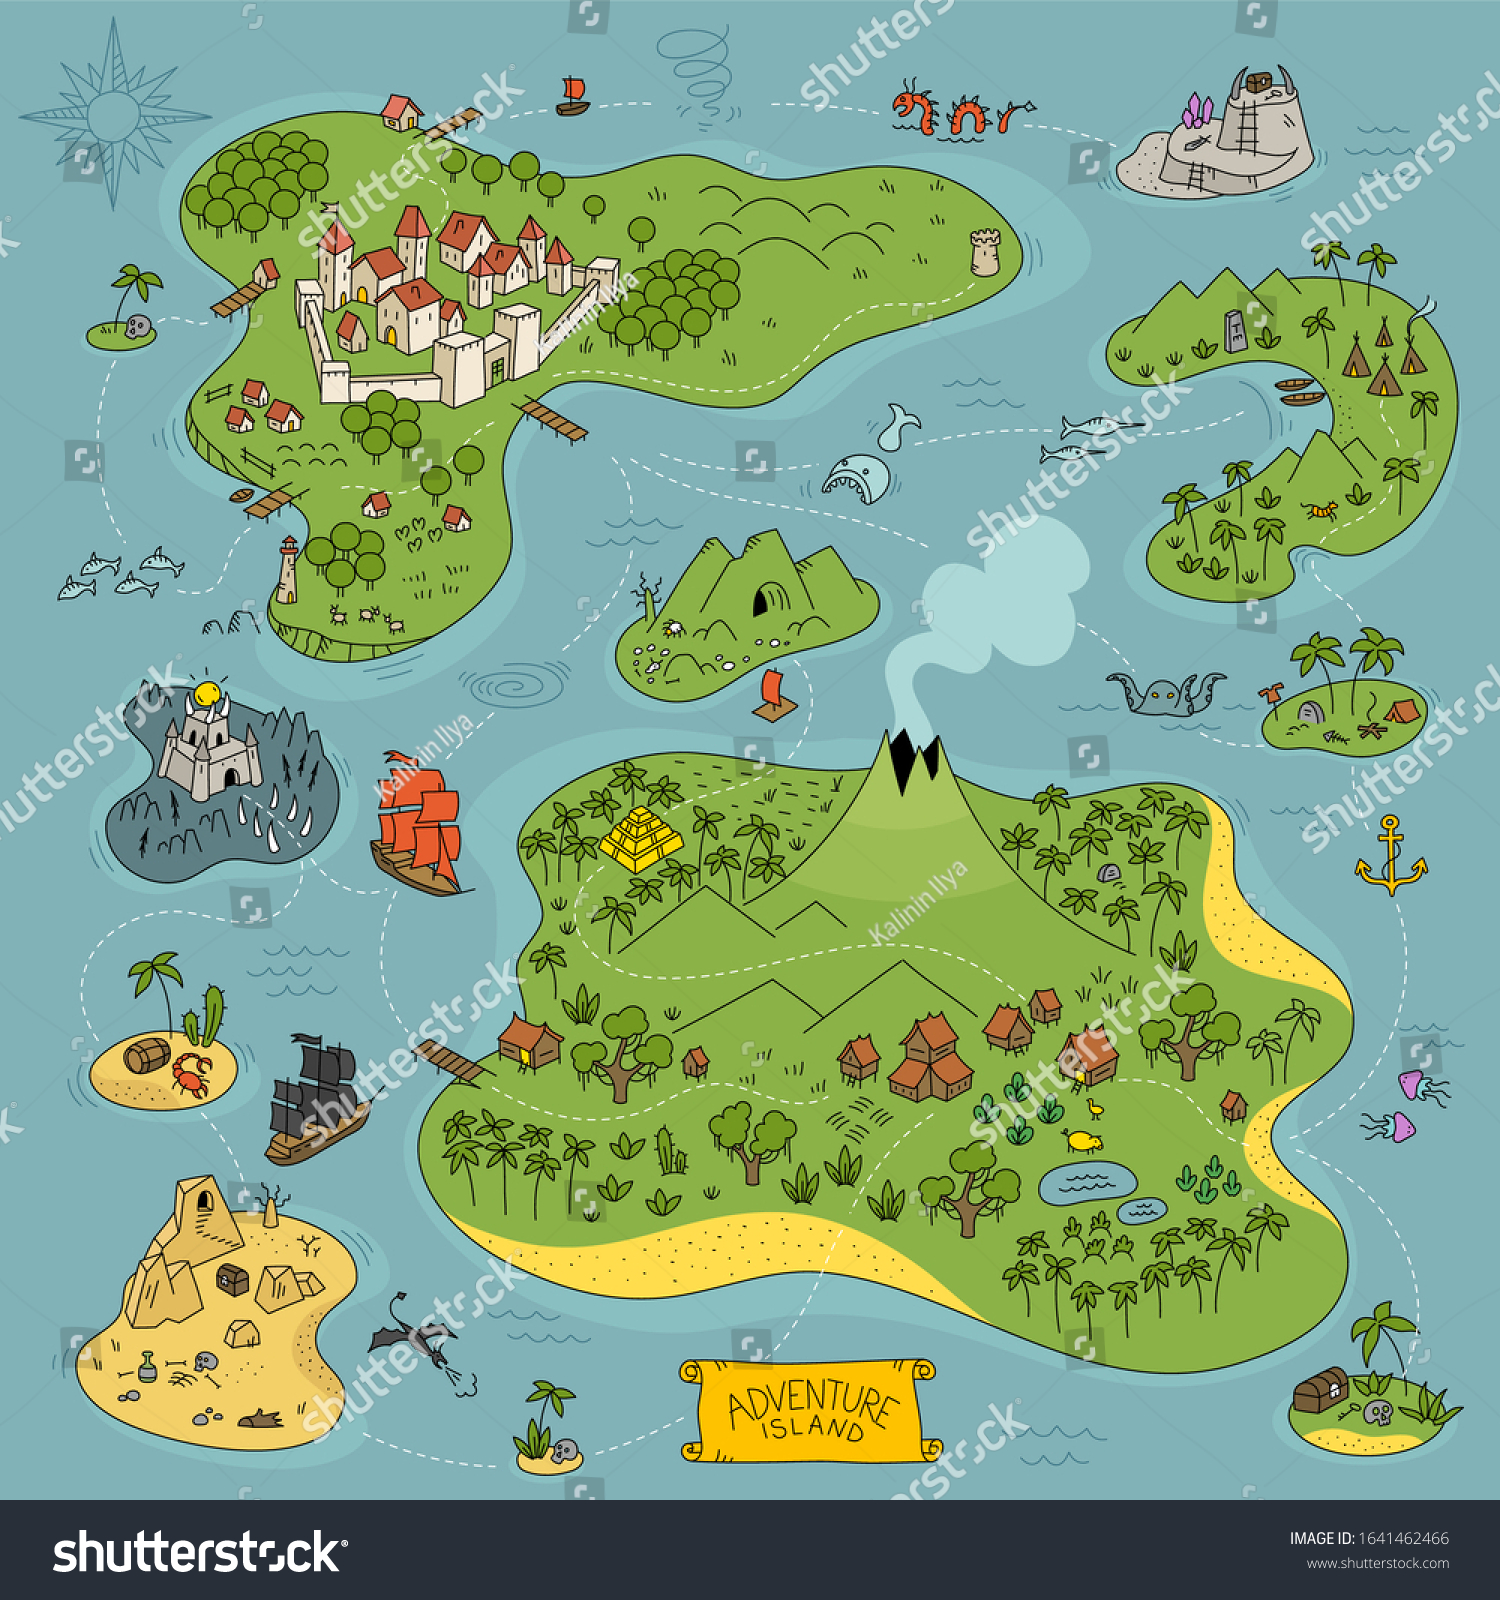 Board Game Kit Adventure Island Map Stock Vector (Royalty Free ...